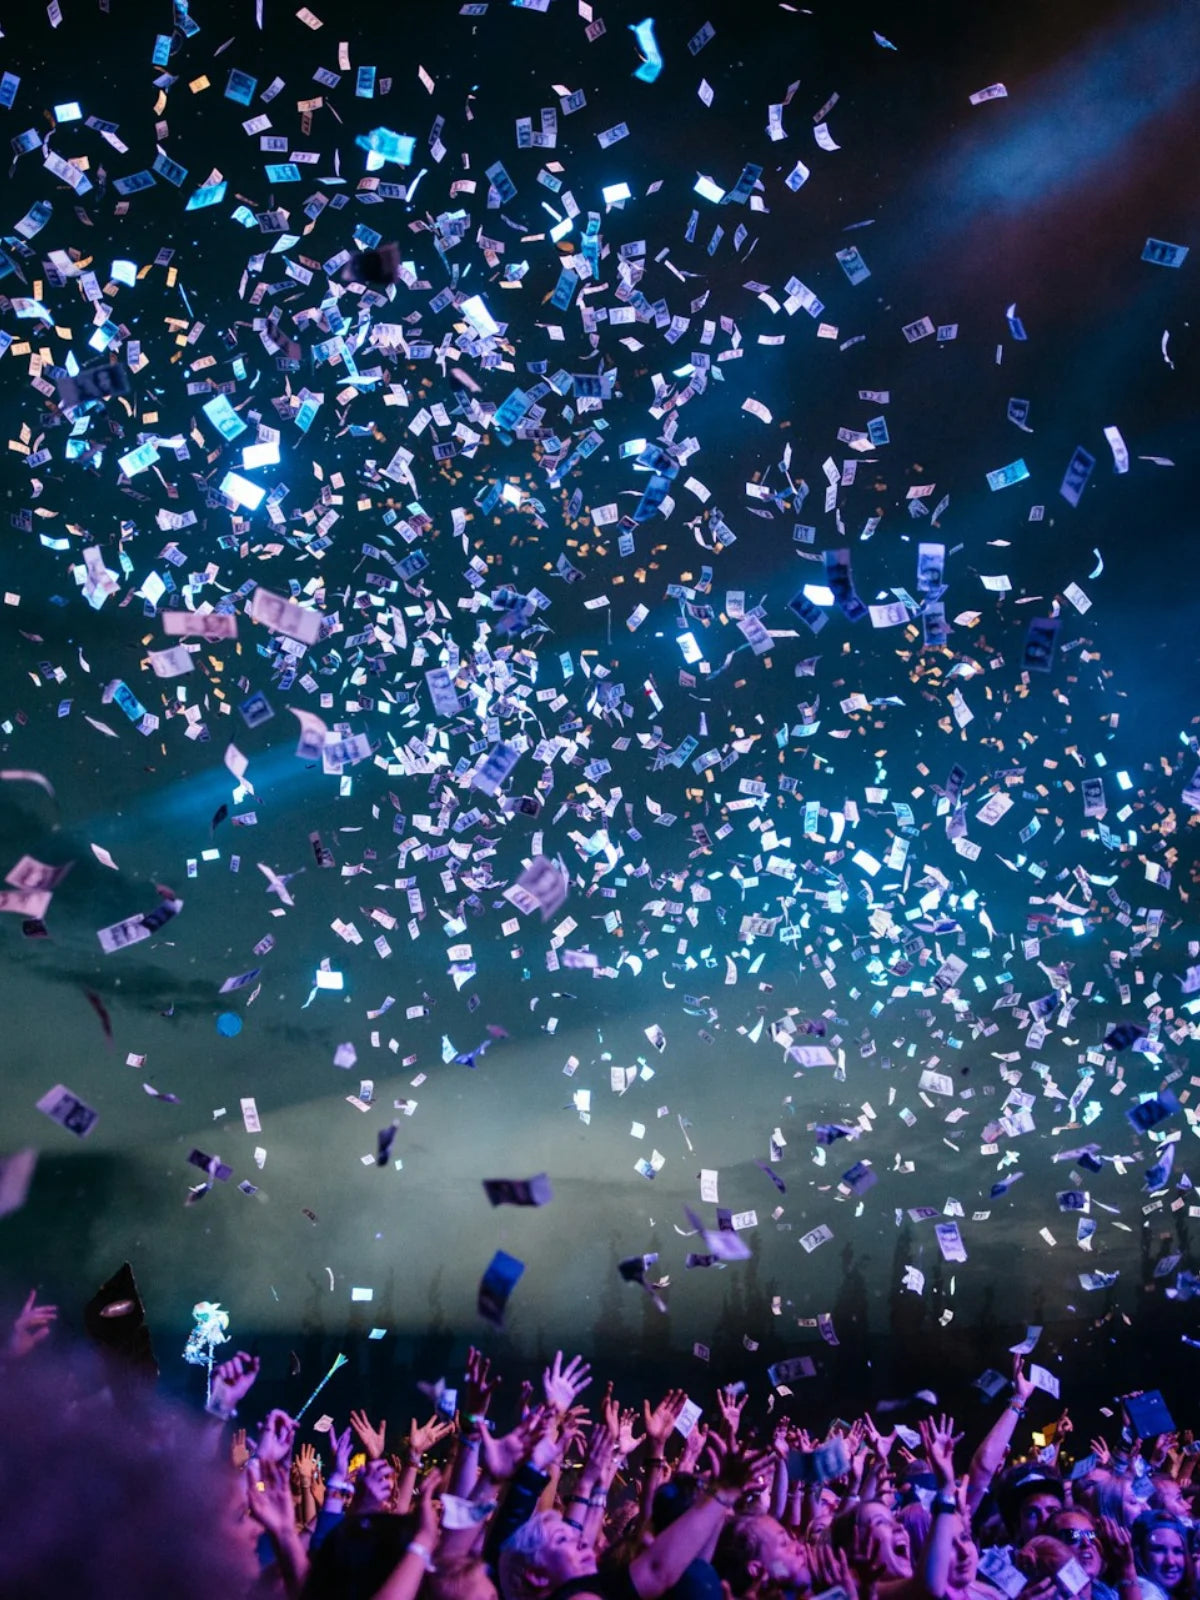 view of a crowd at a concert with a bunch of white confettis